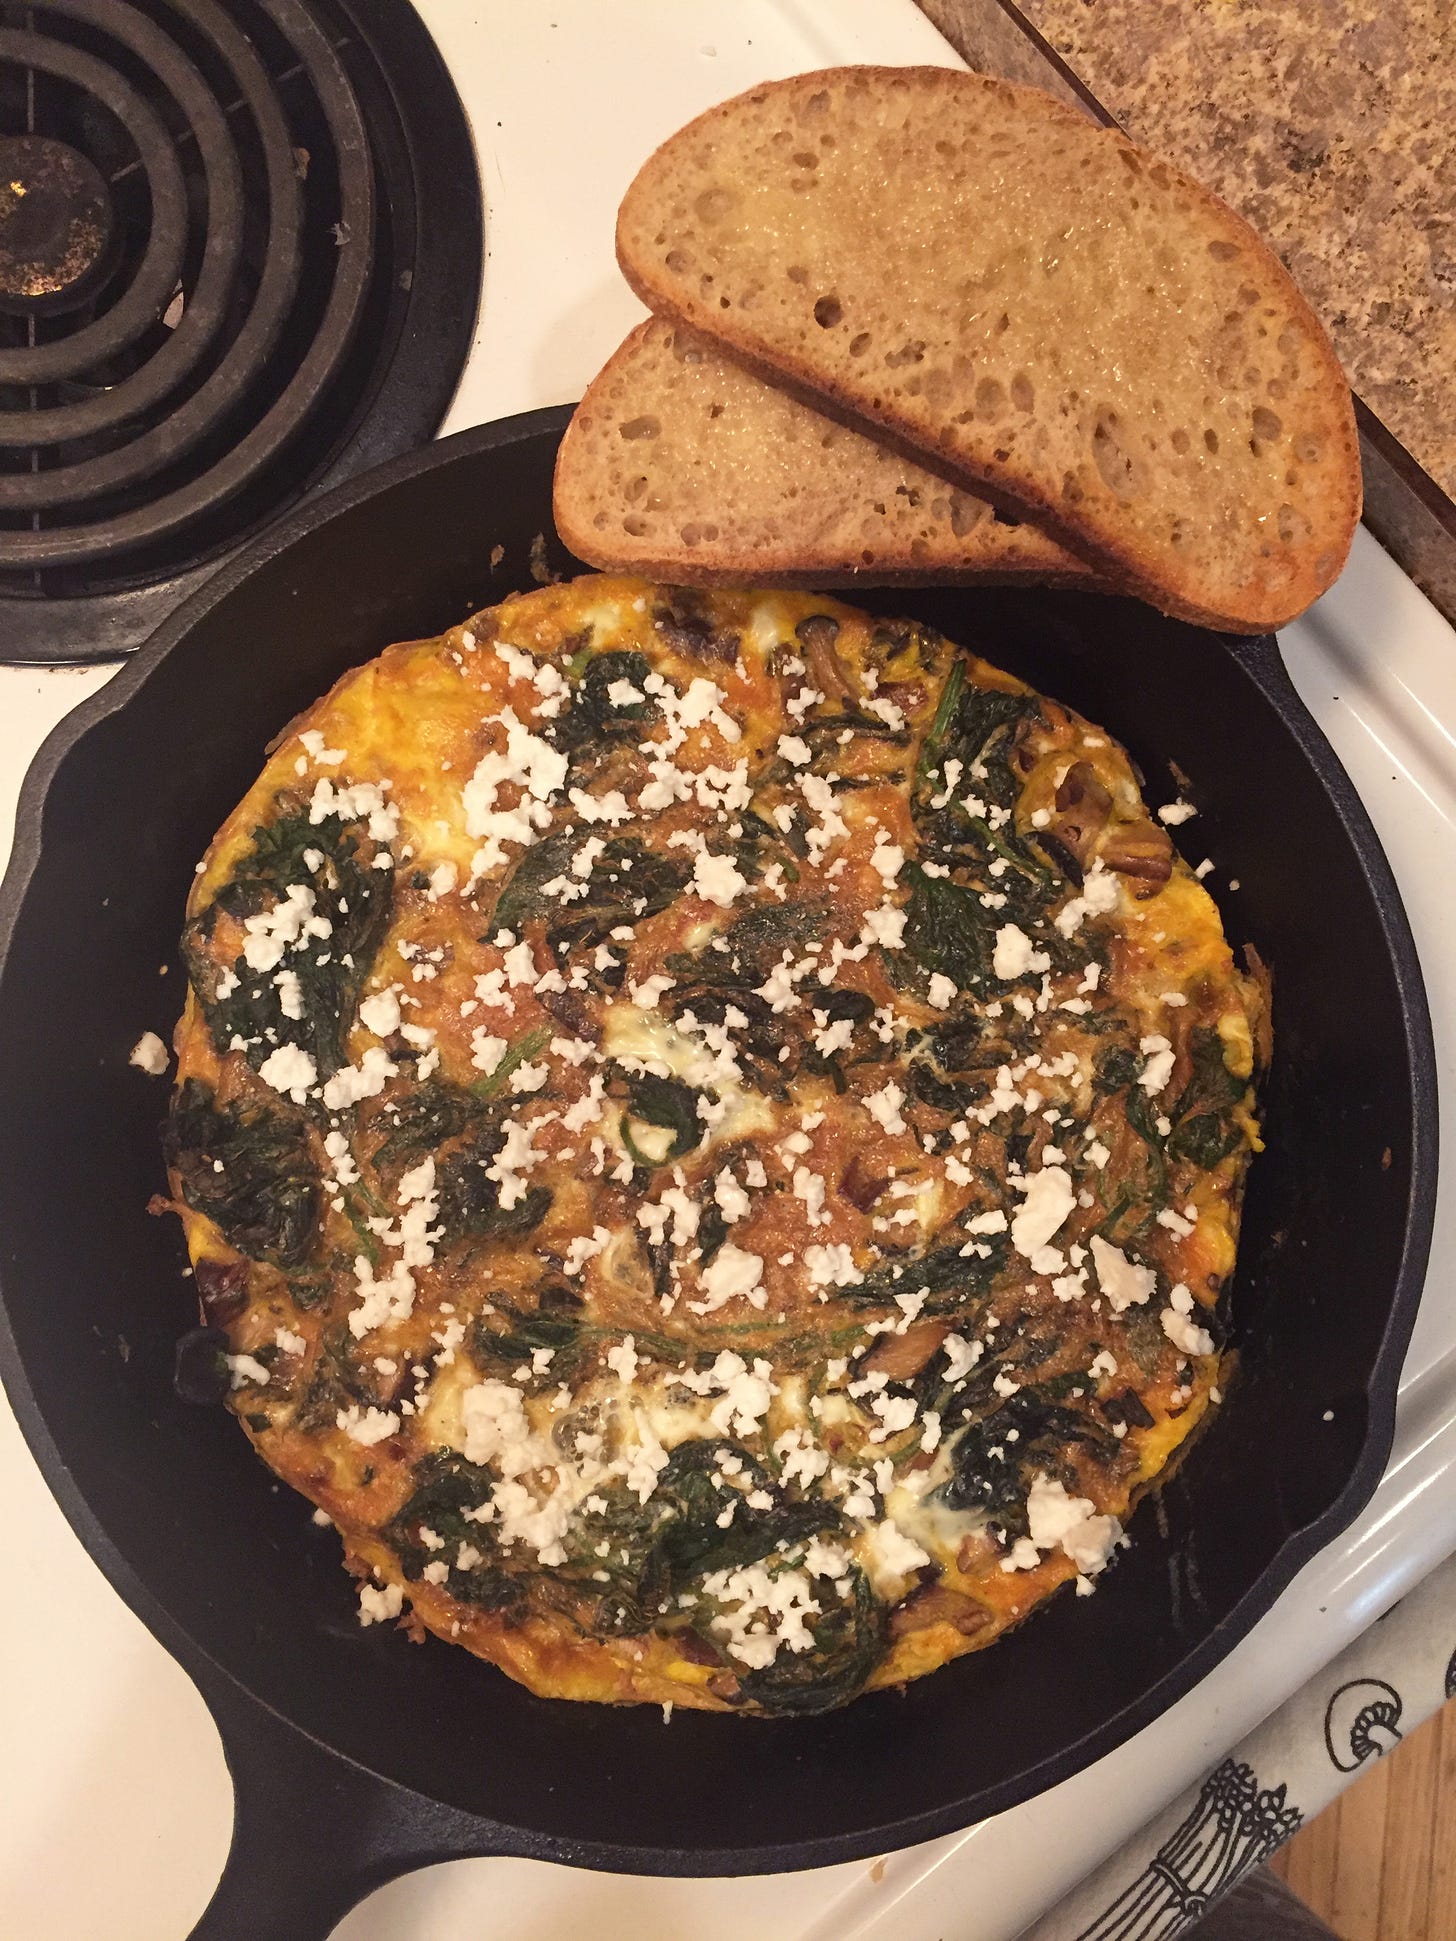 A cast iron pan sits on the stove, filled with a frittata of mixed mushrooms and dark green nettles. Crumbles of feta across the top contrast the deep yellow of the egg, and resting at the edge of the pan are two slices of whole wheat sourdough.